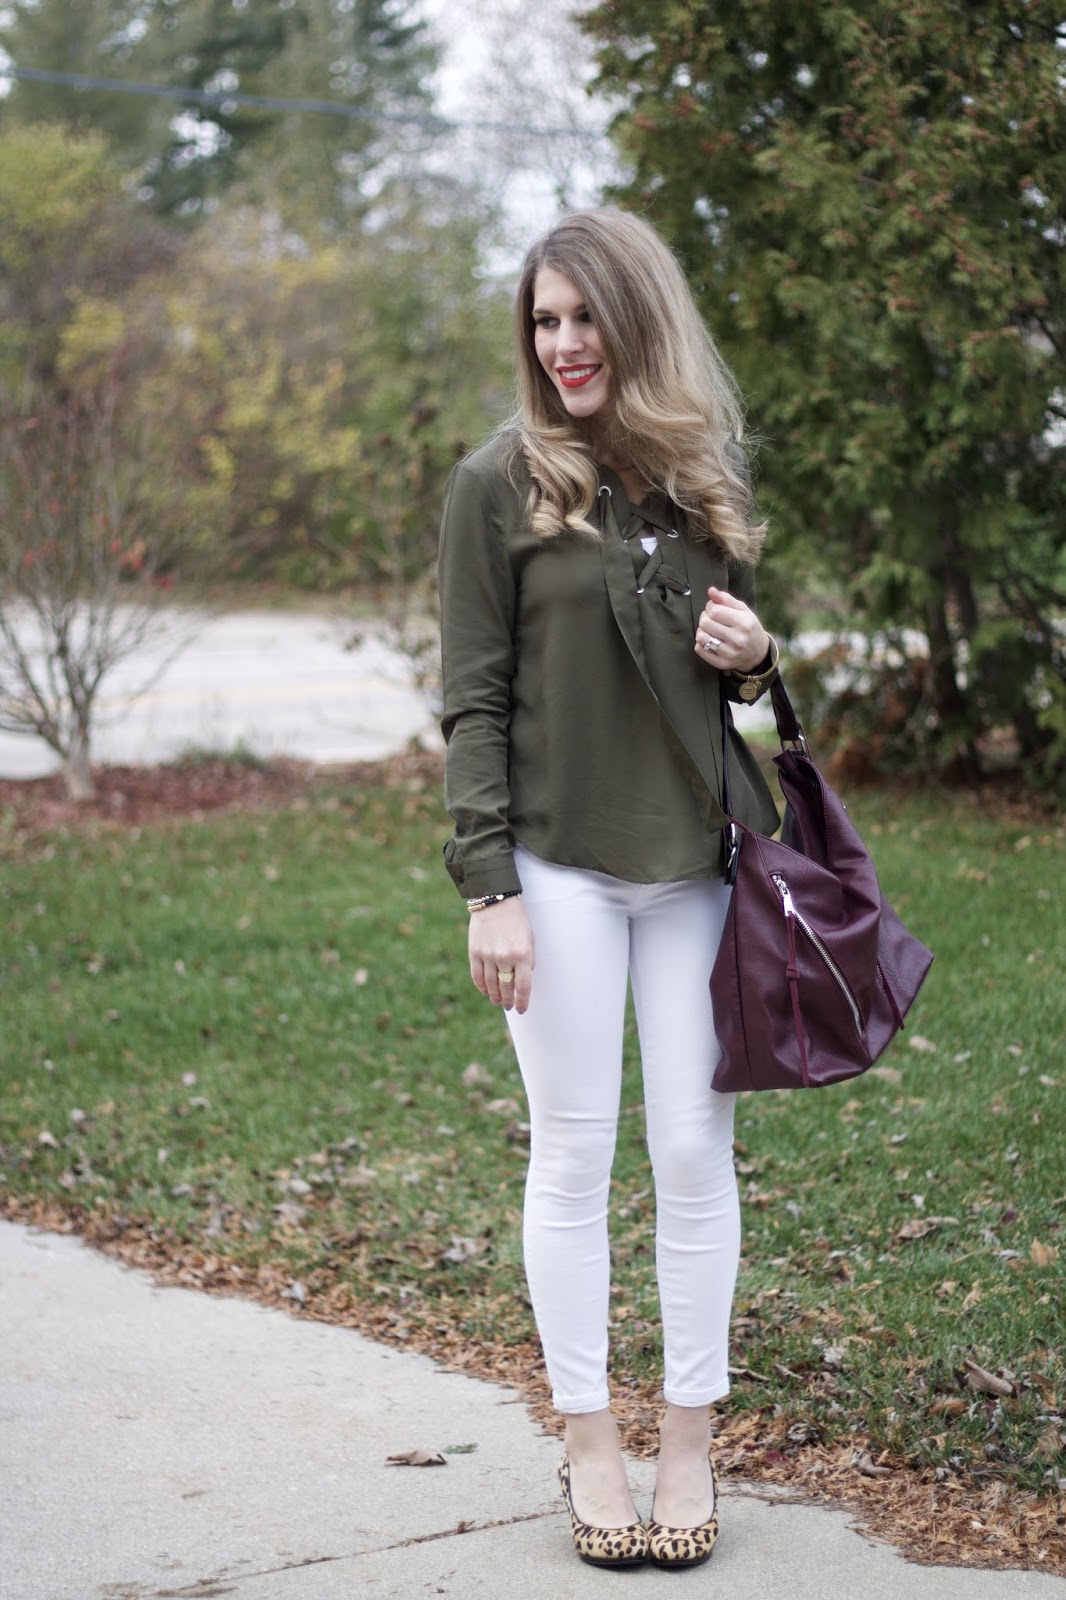 Olive Lace-up Top - I do